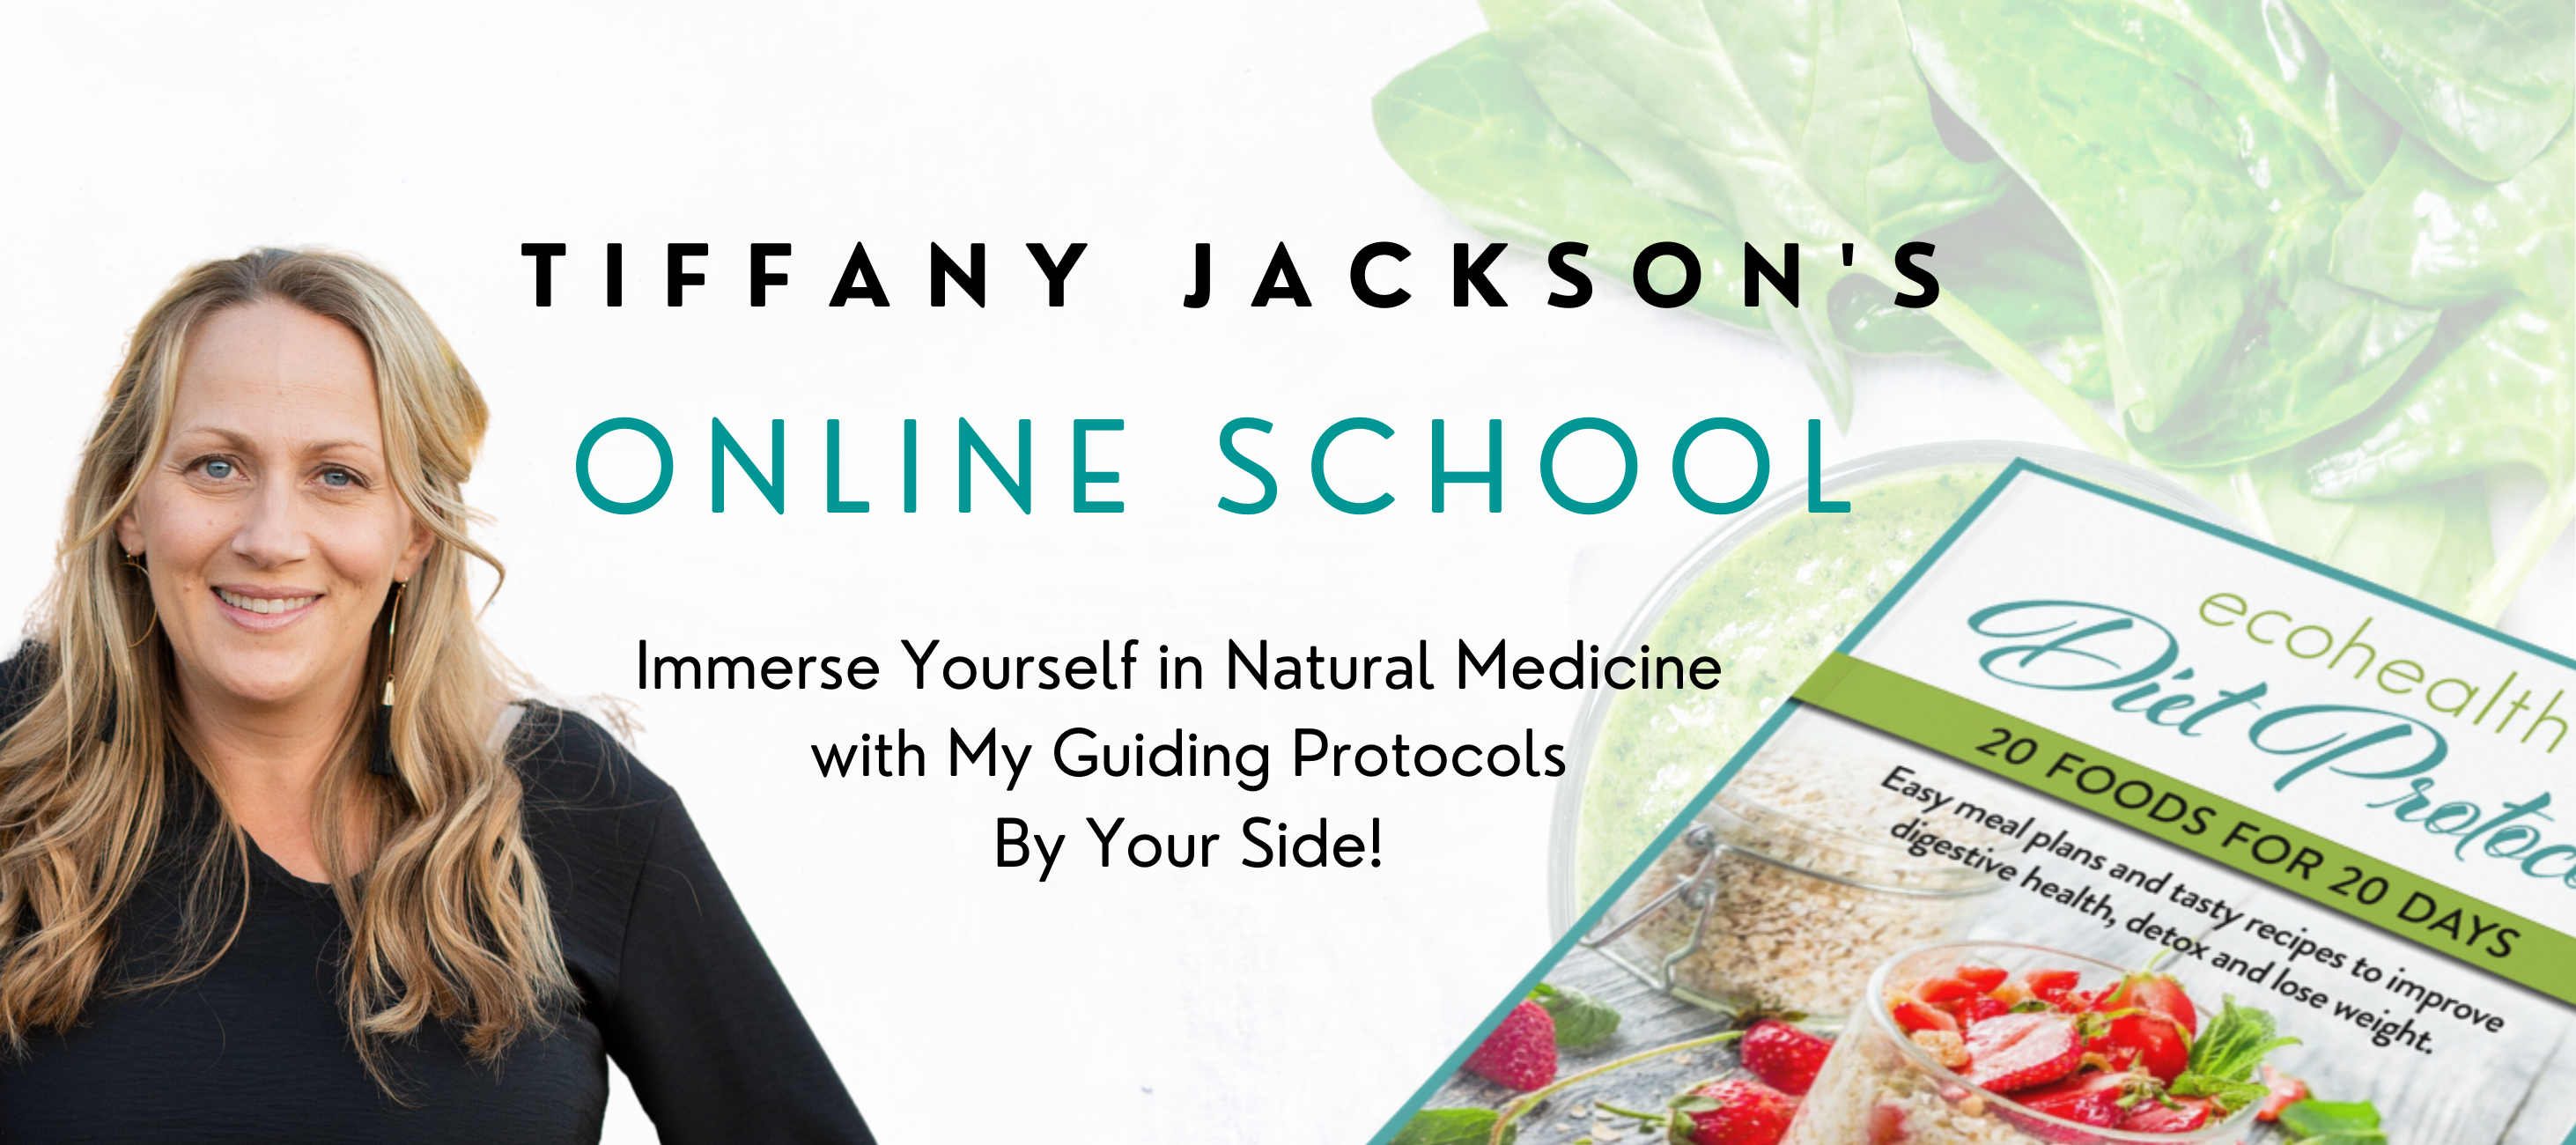 Online School of Natural Medicine and Happy Tummies! Natural Medicine Naturopathic Doctor Tiffany Jackson Online Course South Carolina 